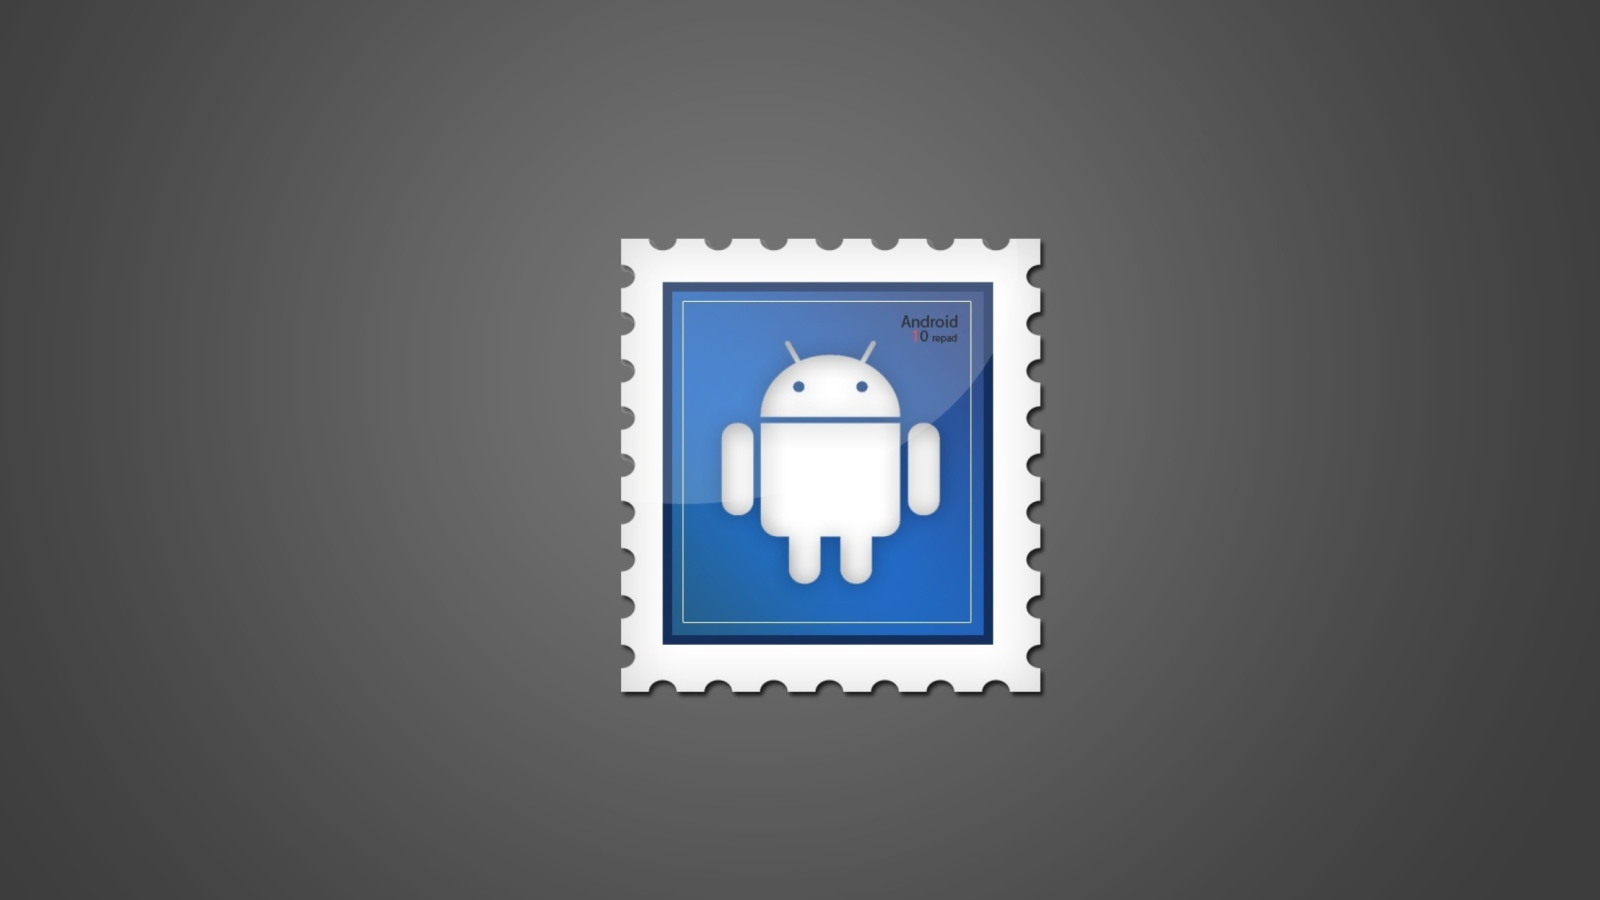 Android Postage Stamp wallpaper 1600x900